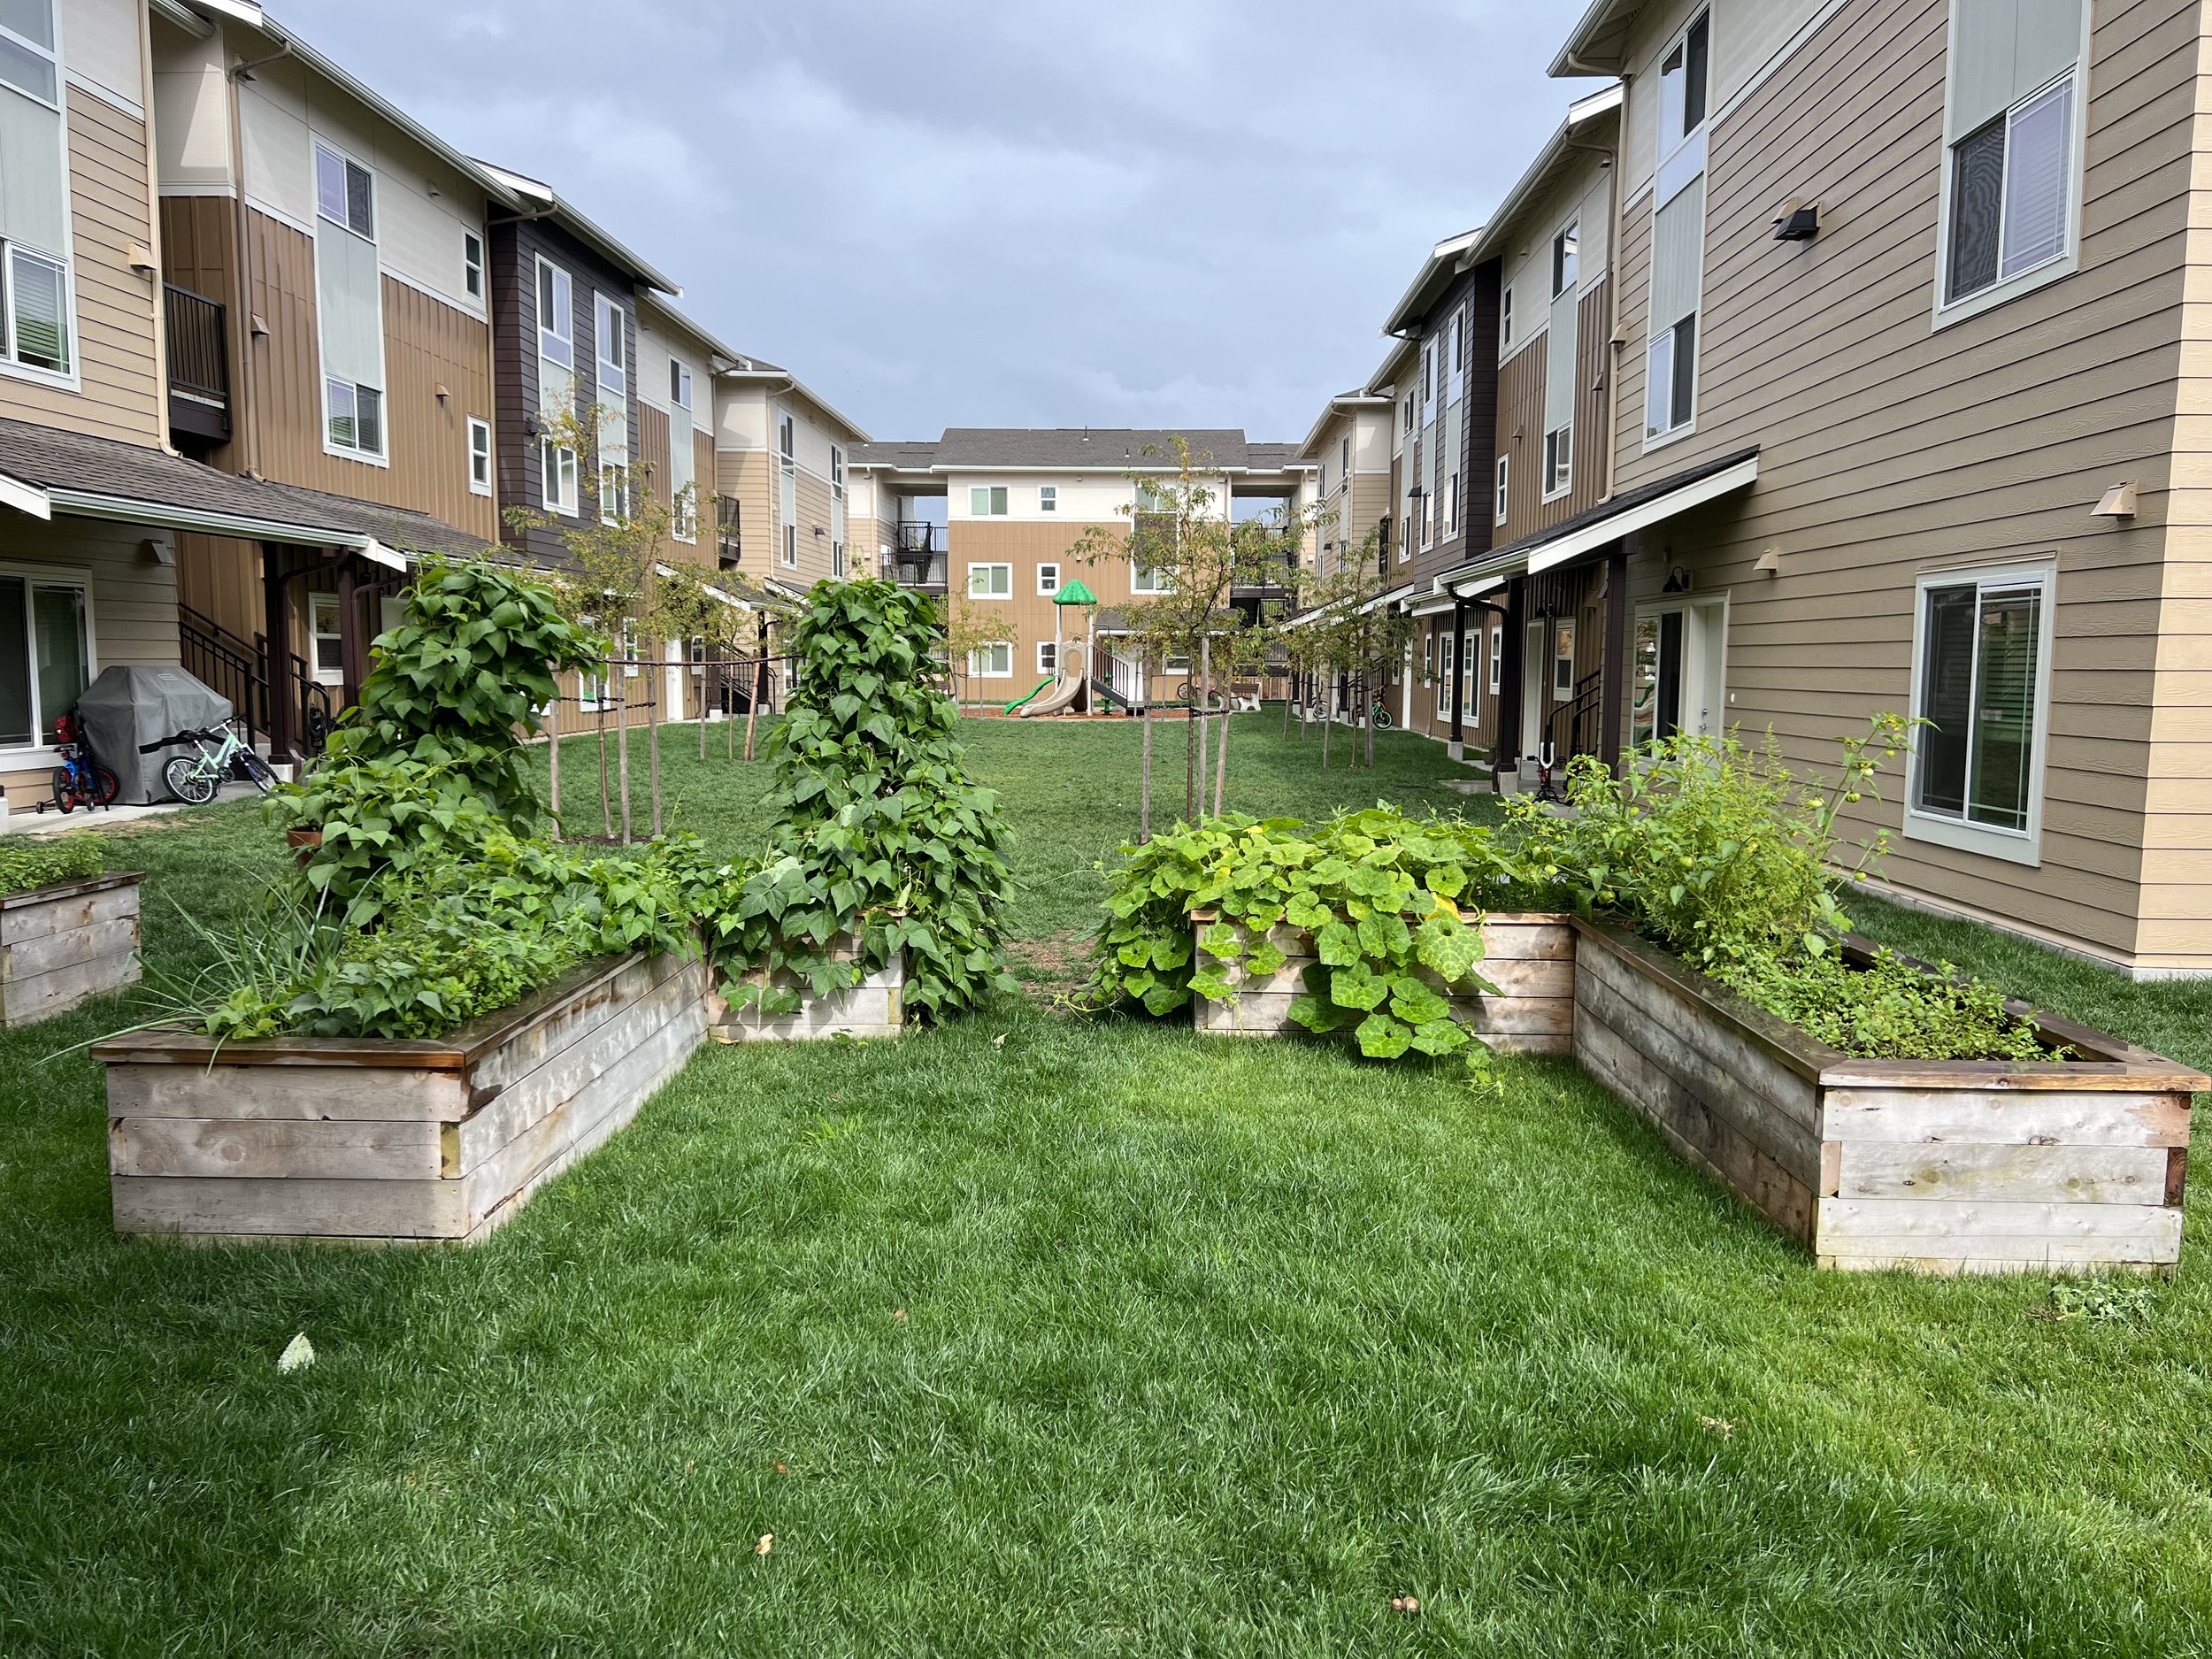  Affordable Family Housing Blooming with Natural Features 